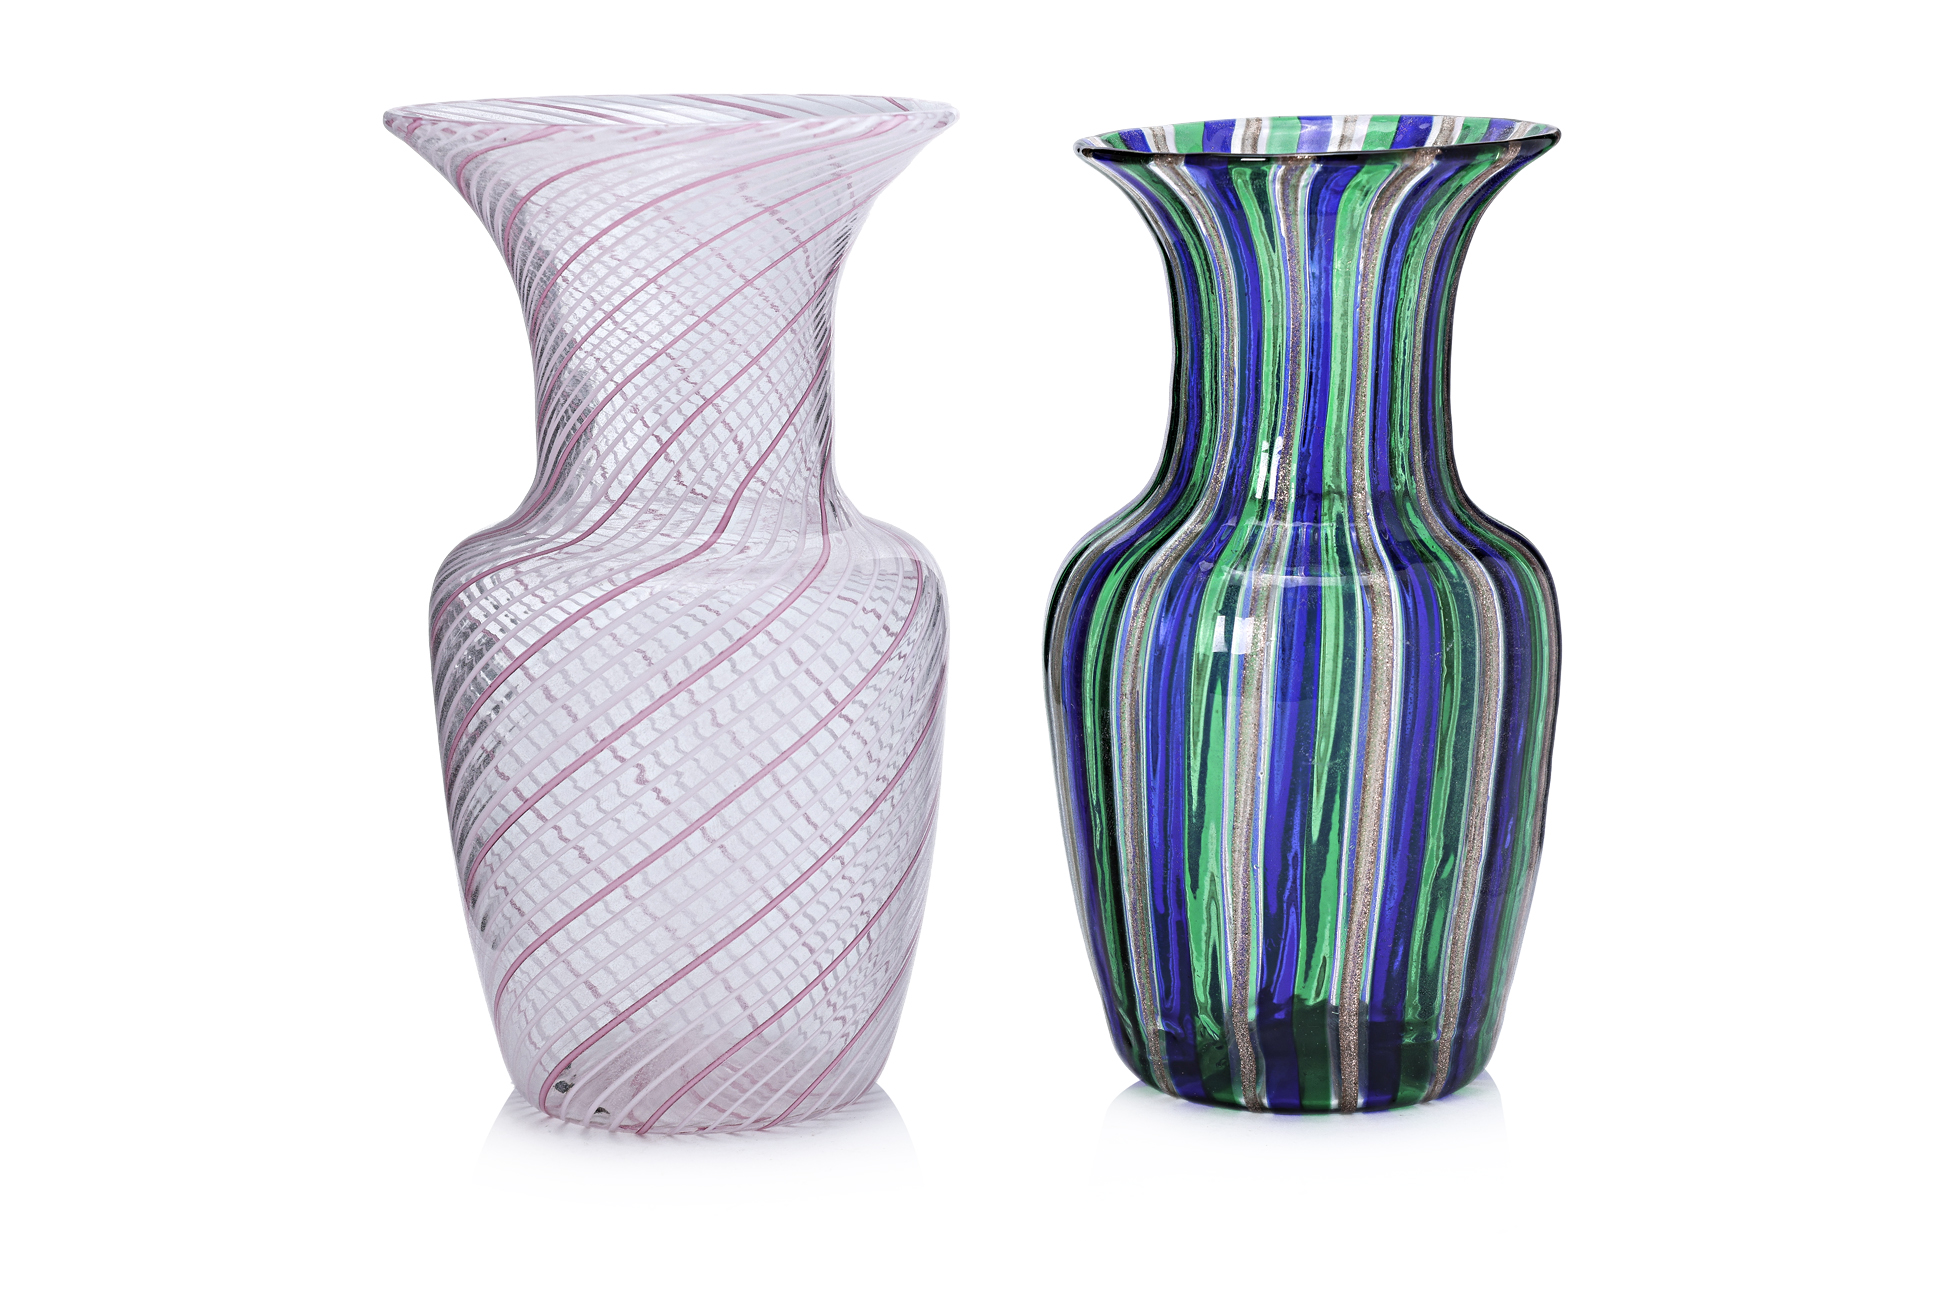 TWO MURANO GLASS CANE VASES IN THE MANNER OF VENINI